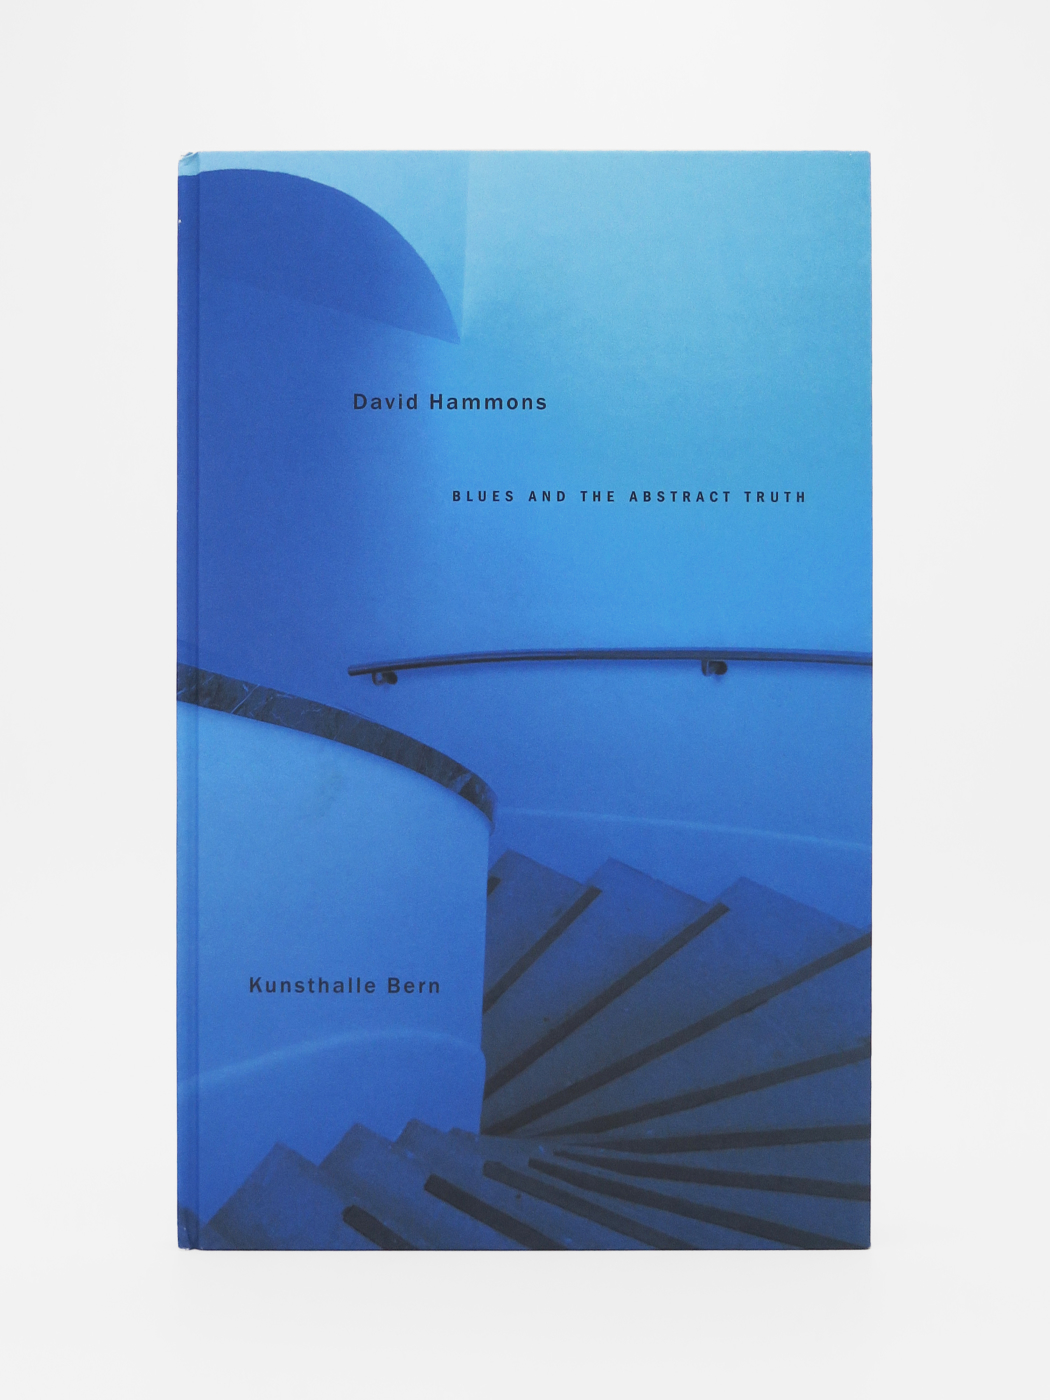 David Hammons, Blues and the Abstract Truth